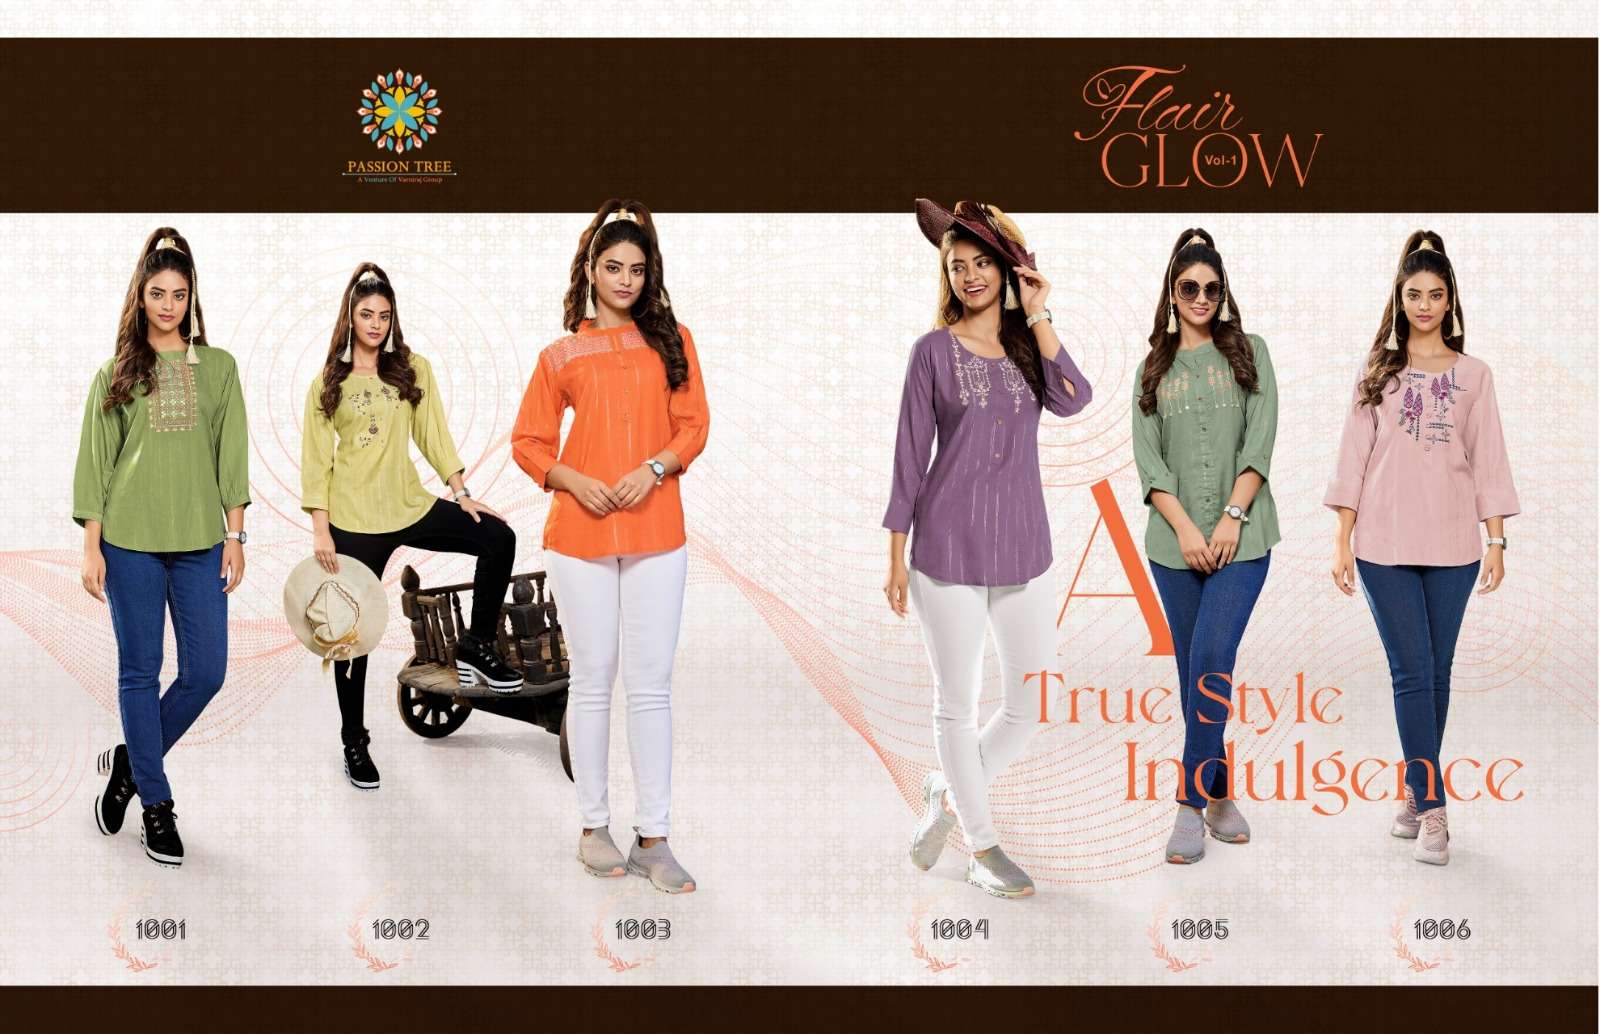 passion tree flair glow vol-1 1001-1006 series fancy designer shorts top new catalogue collection 